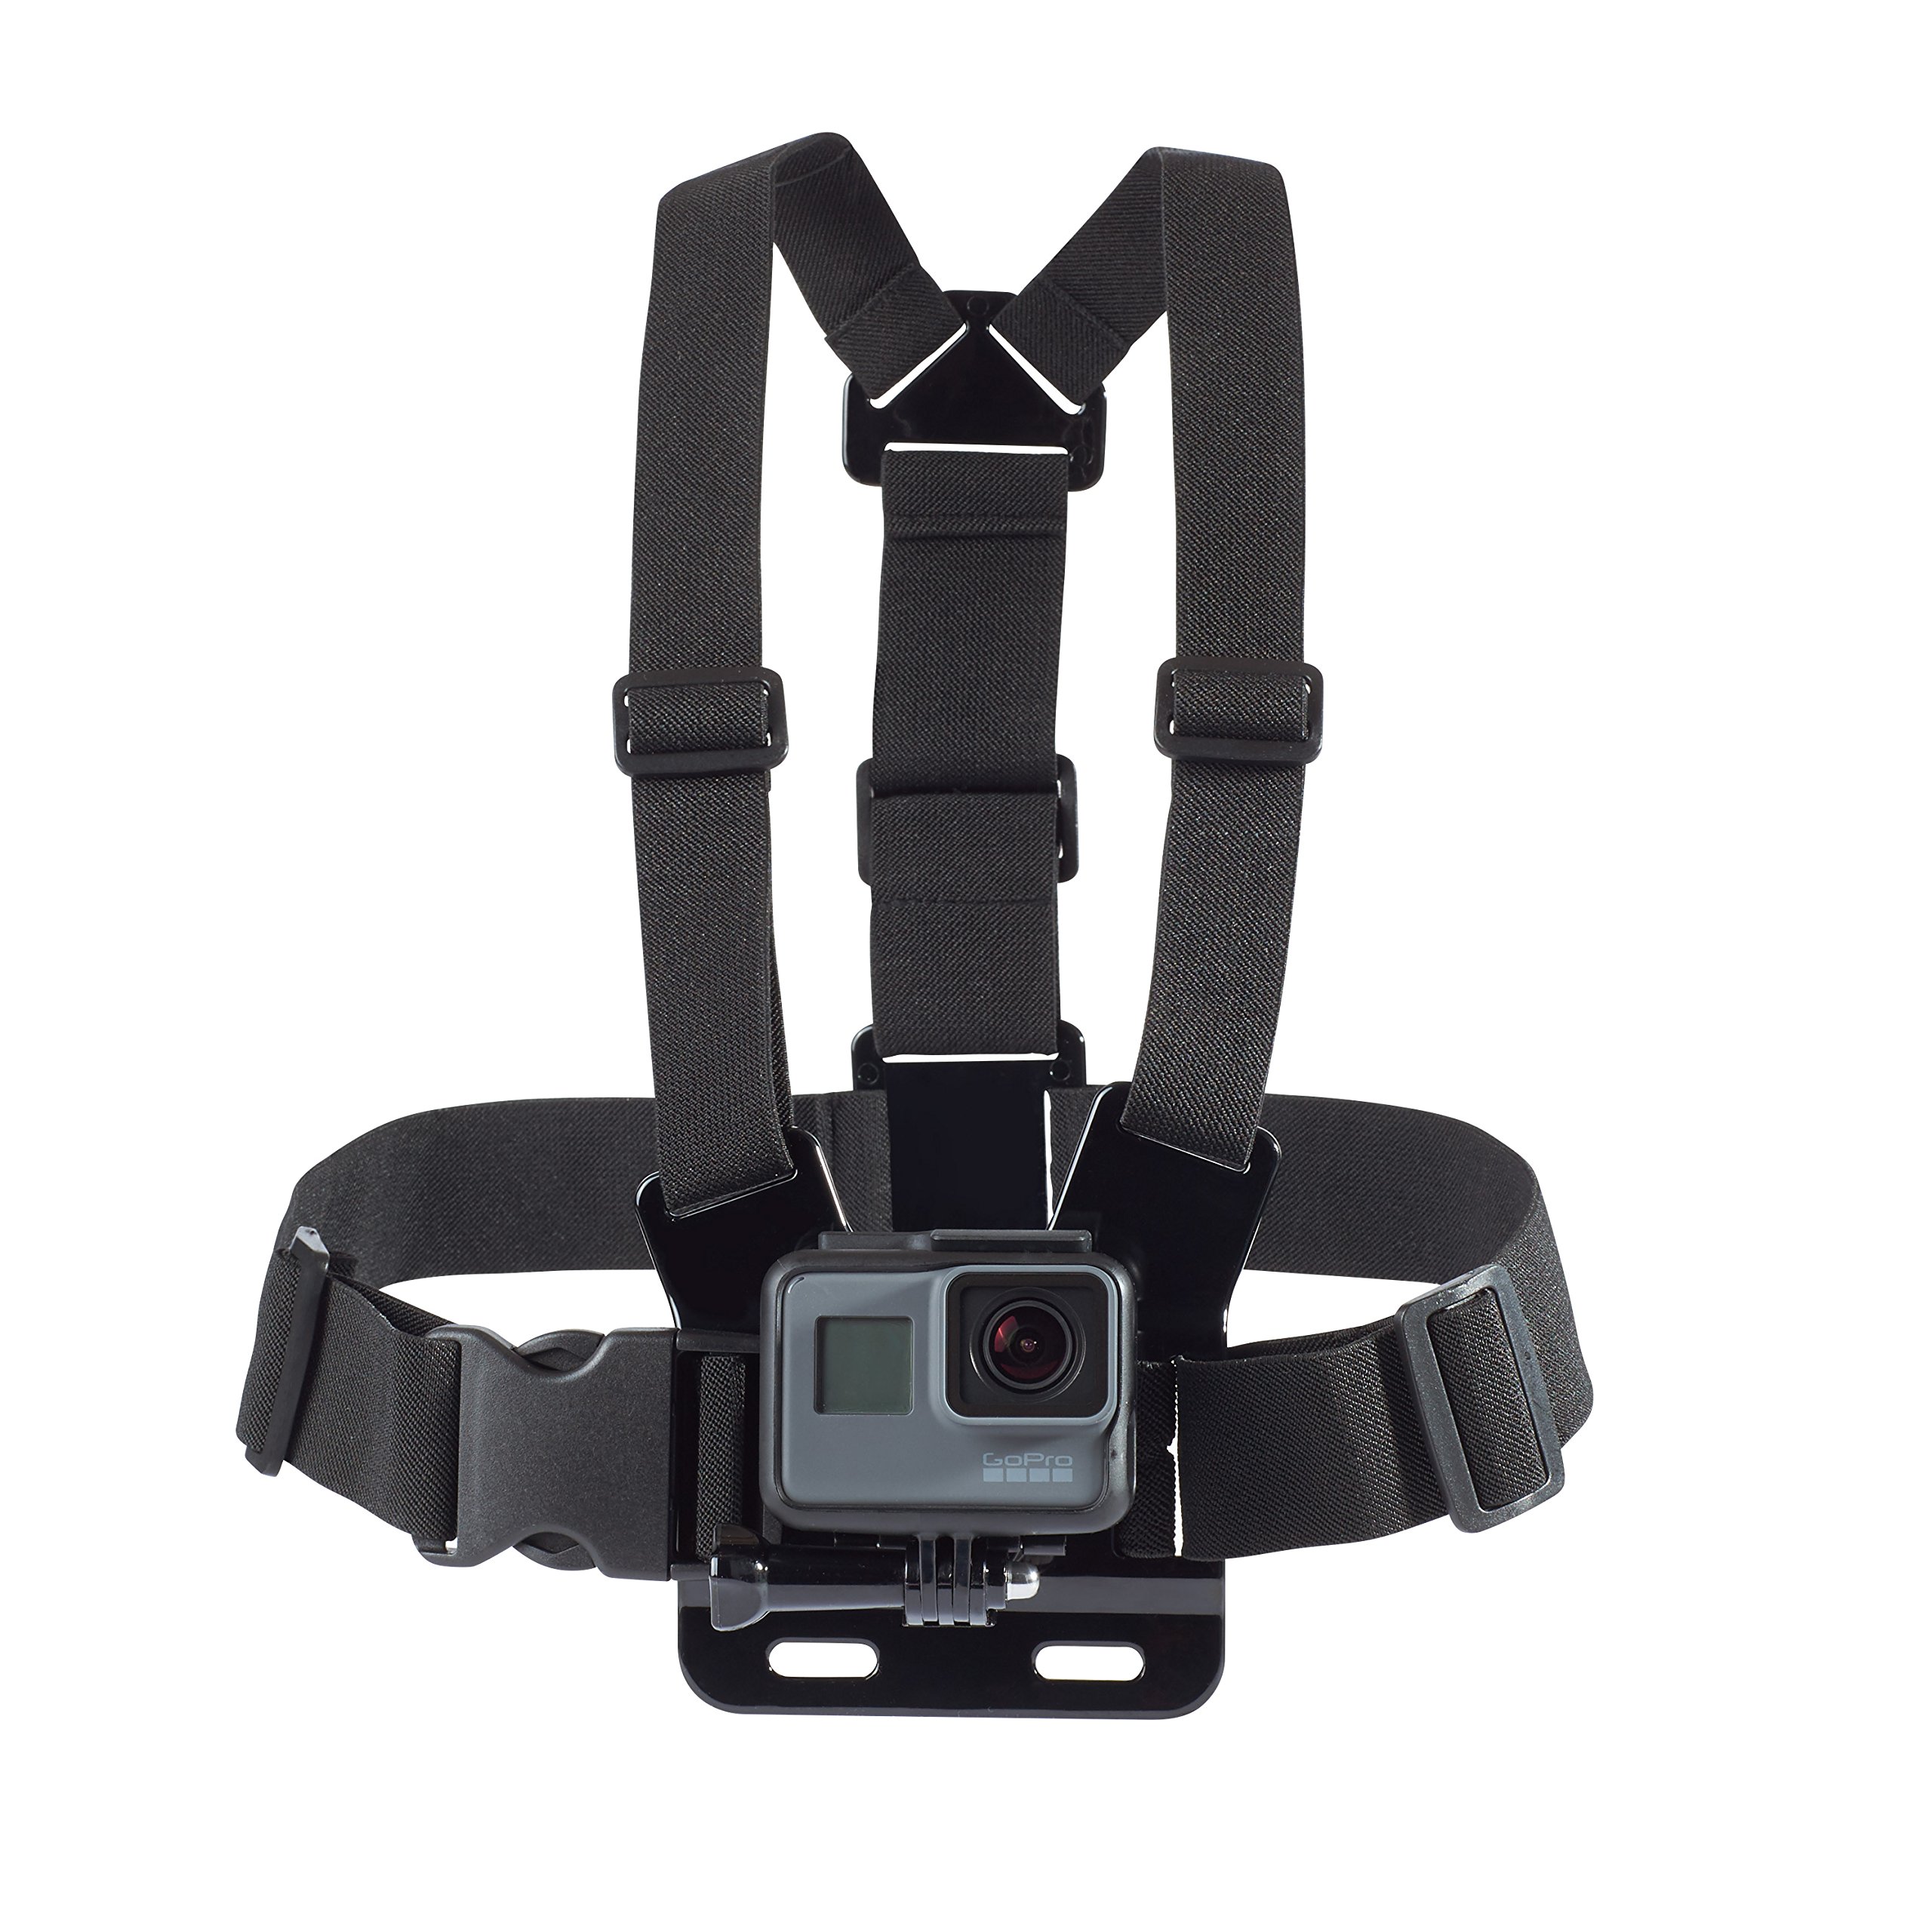 Book Cover Amazon Basics Adjustable Chest Mount Harness For GoPro Camera (Compatible with GoPro Hero Series), Black